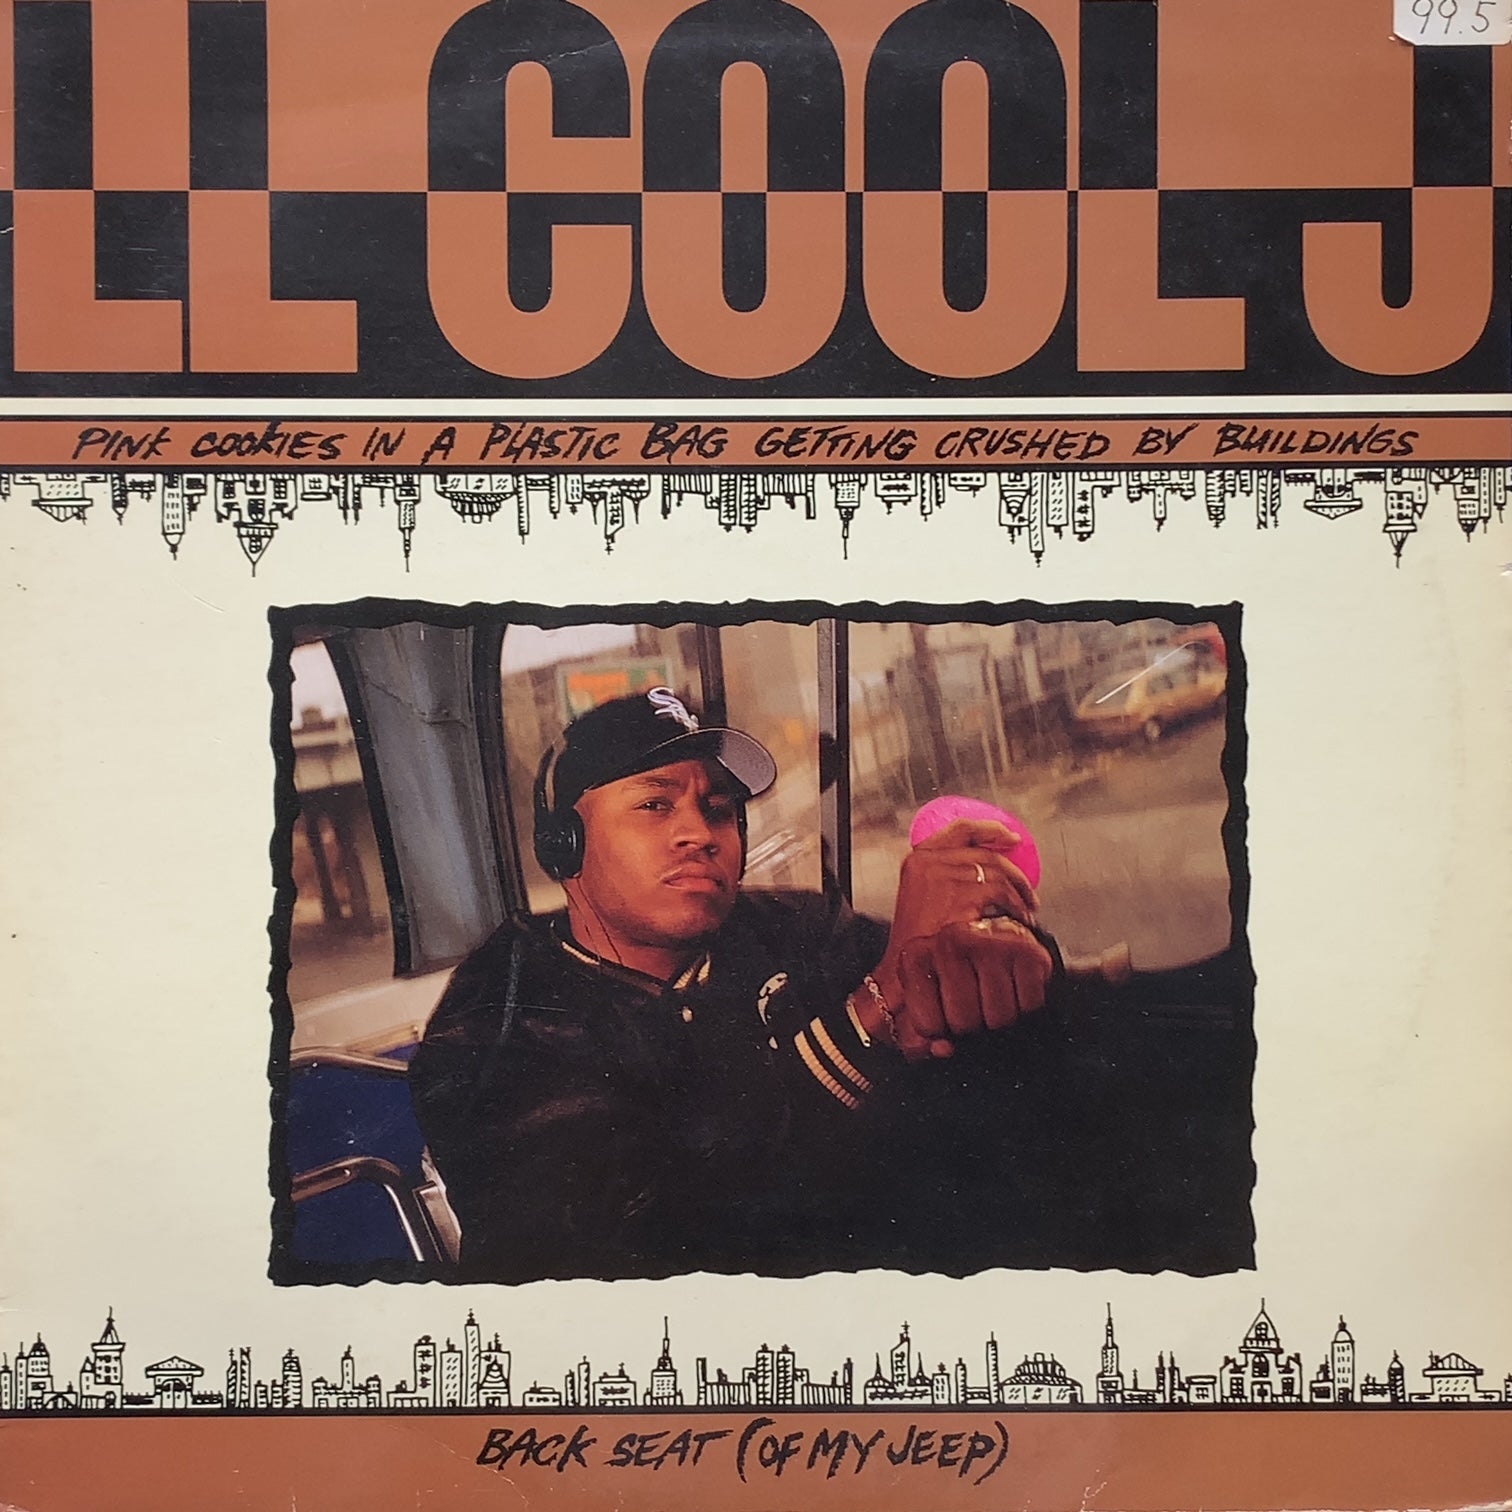 LL COOL J / Pink Cookies In A Plastic Bag Getting Crushed By Buildings –  TICRO MARKET